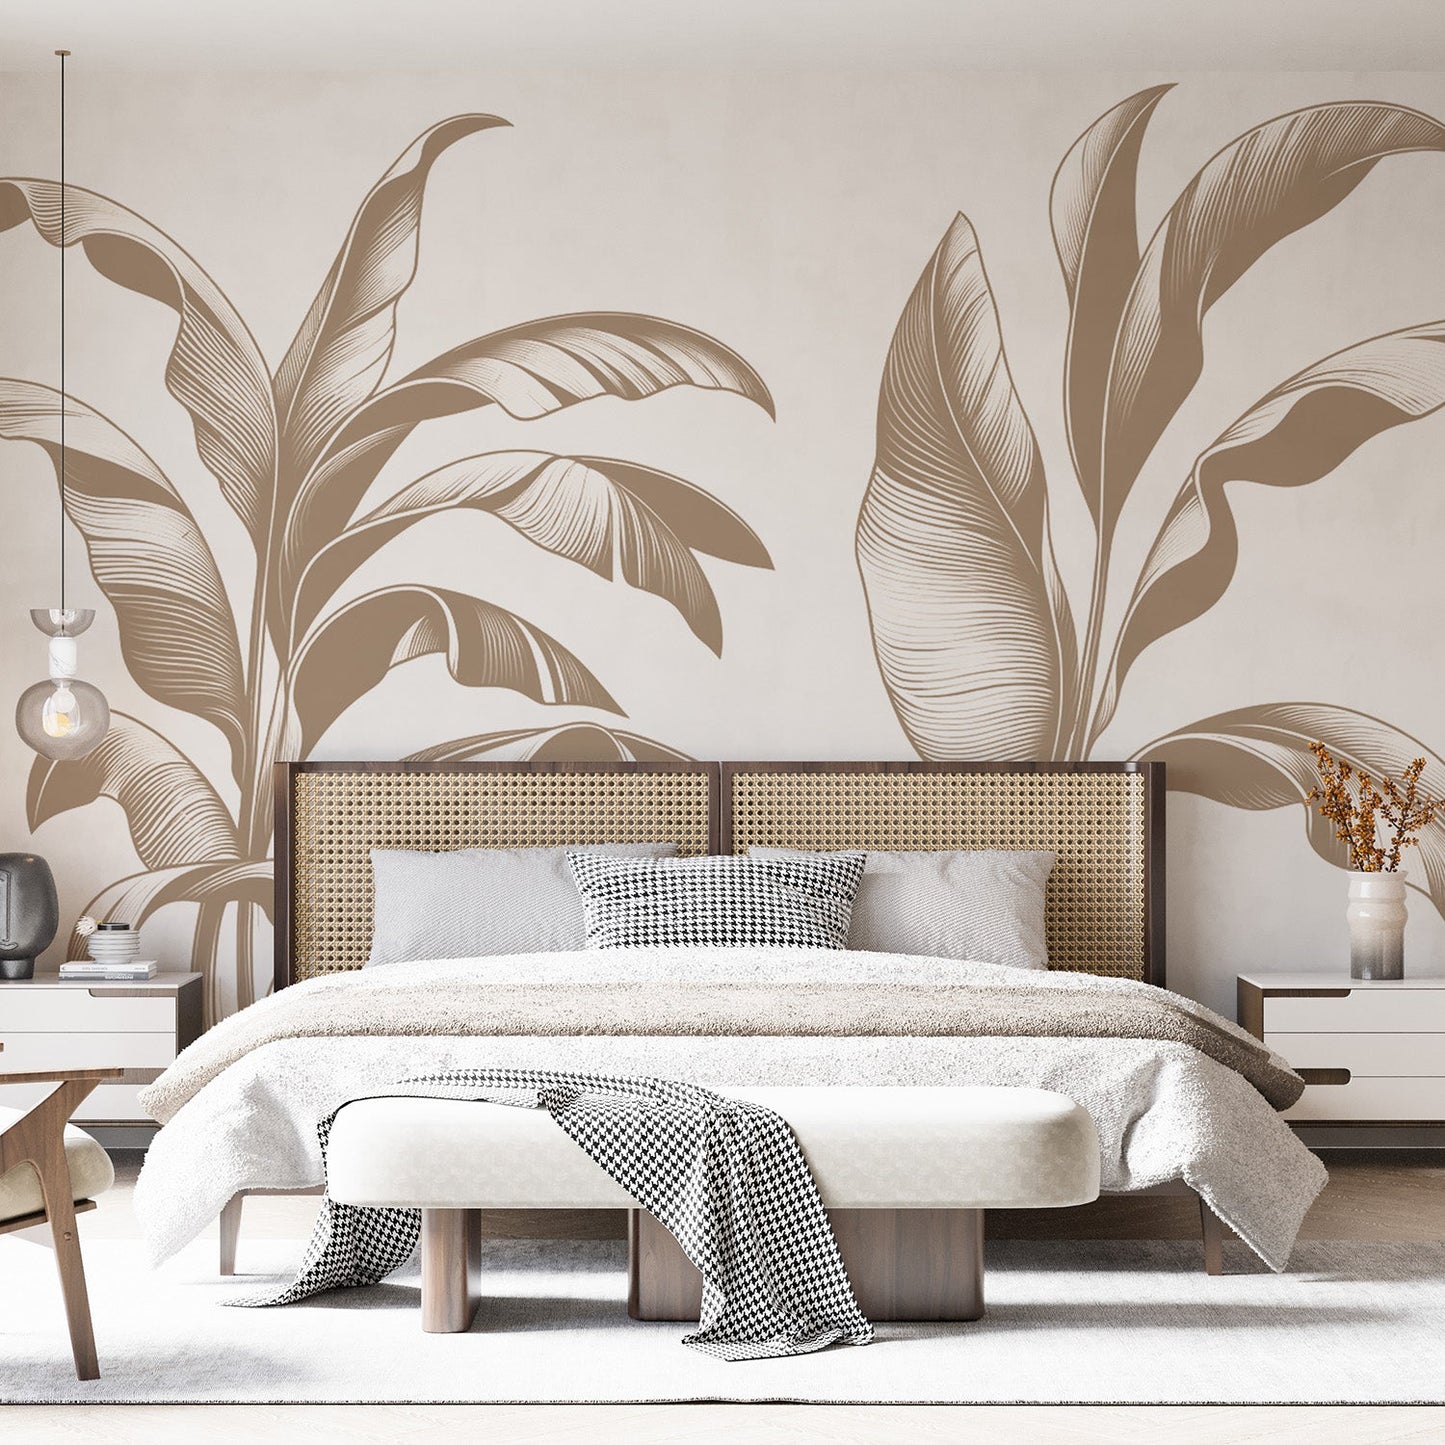 Beige foliage wallpaper | Line art of banana leaf branches